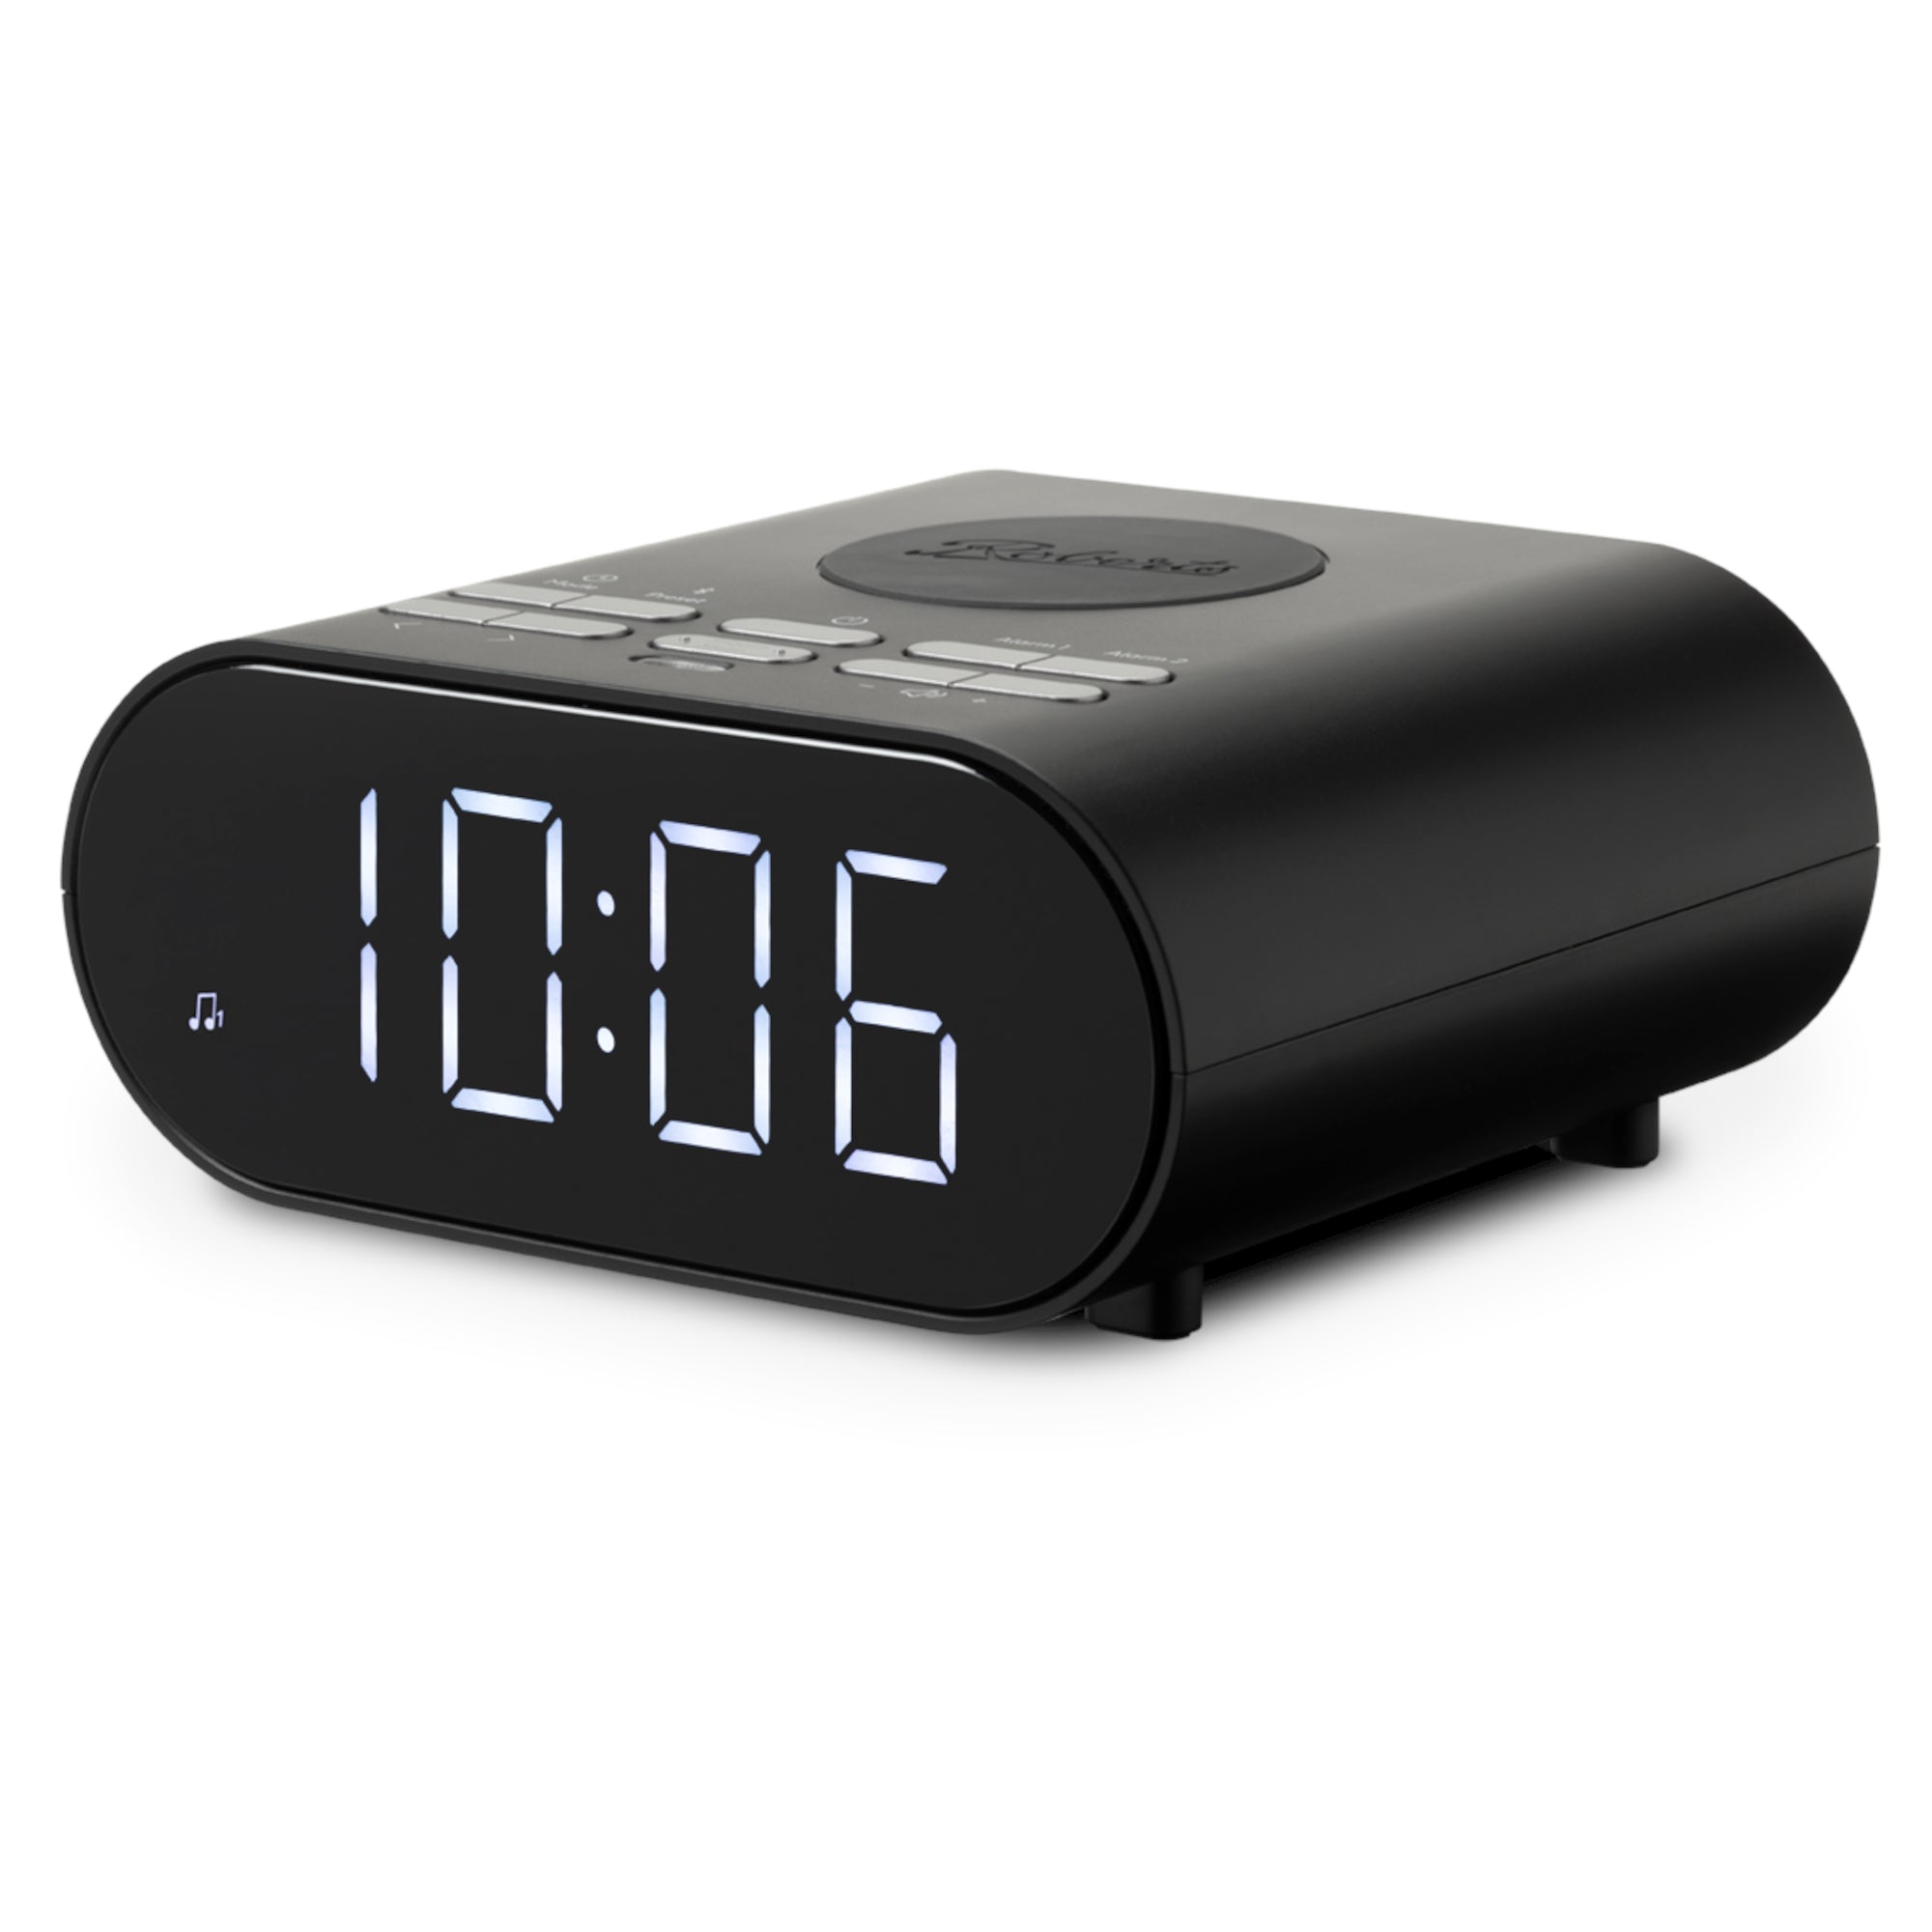 Roberts ORTUS-CHARGEBK Ortus Charge FM Radio with Wireless Charging